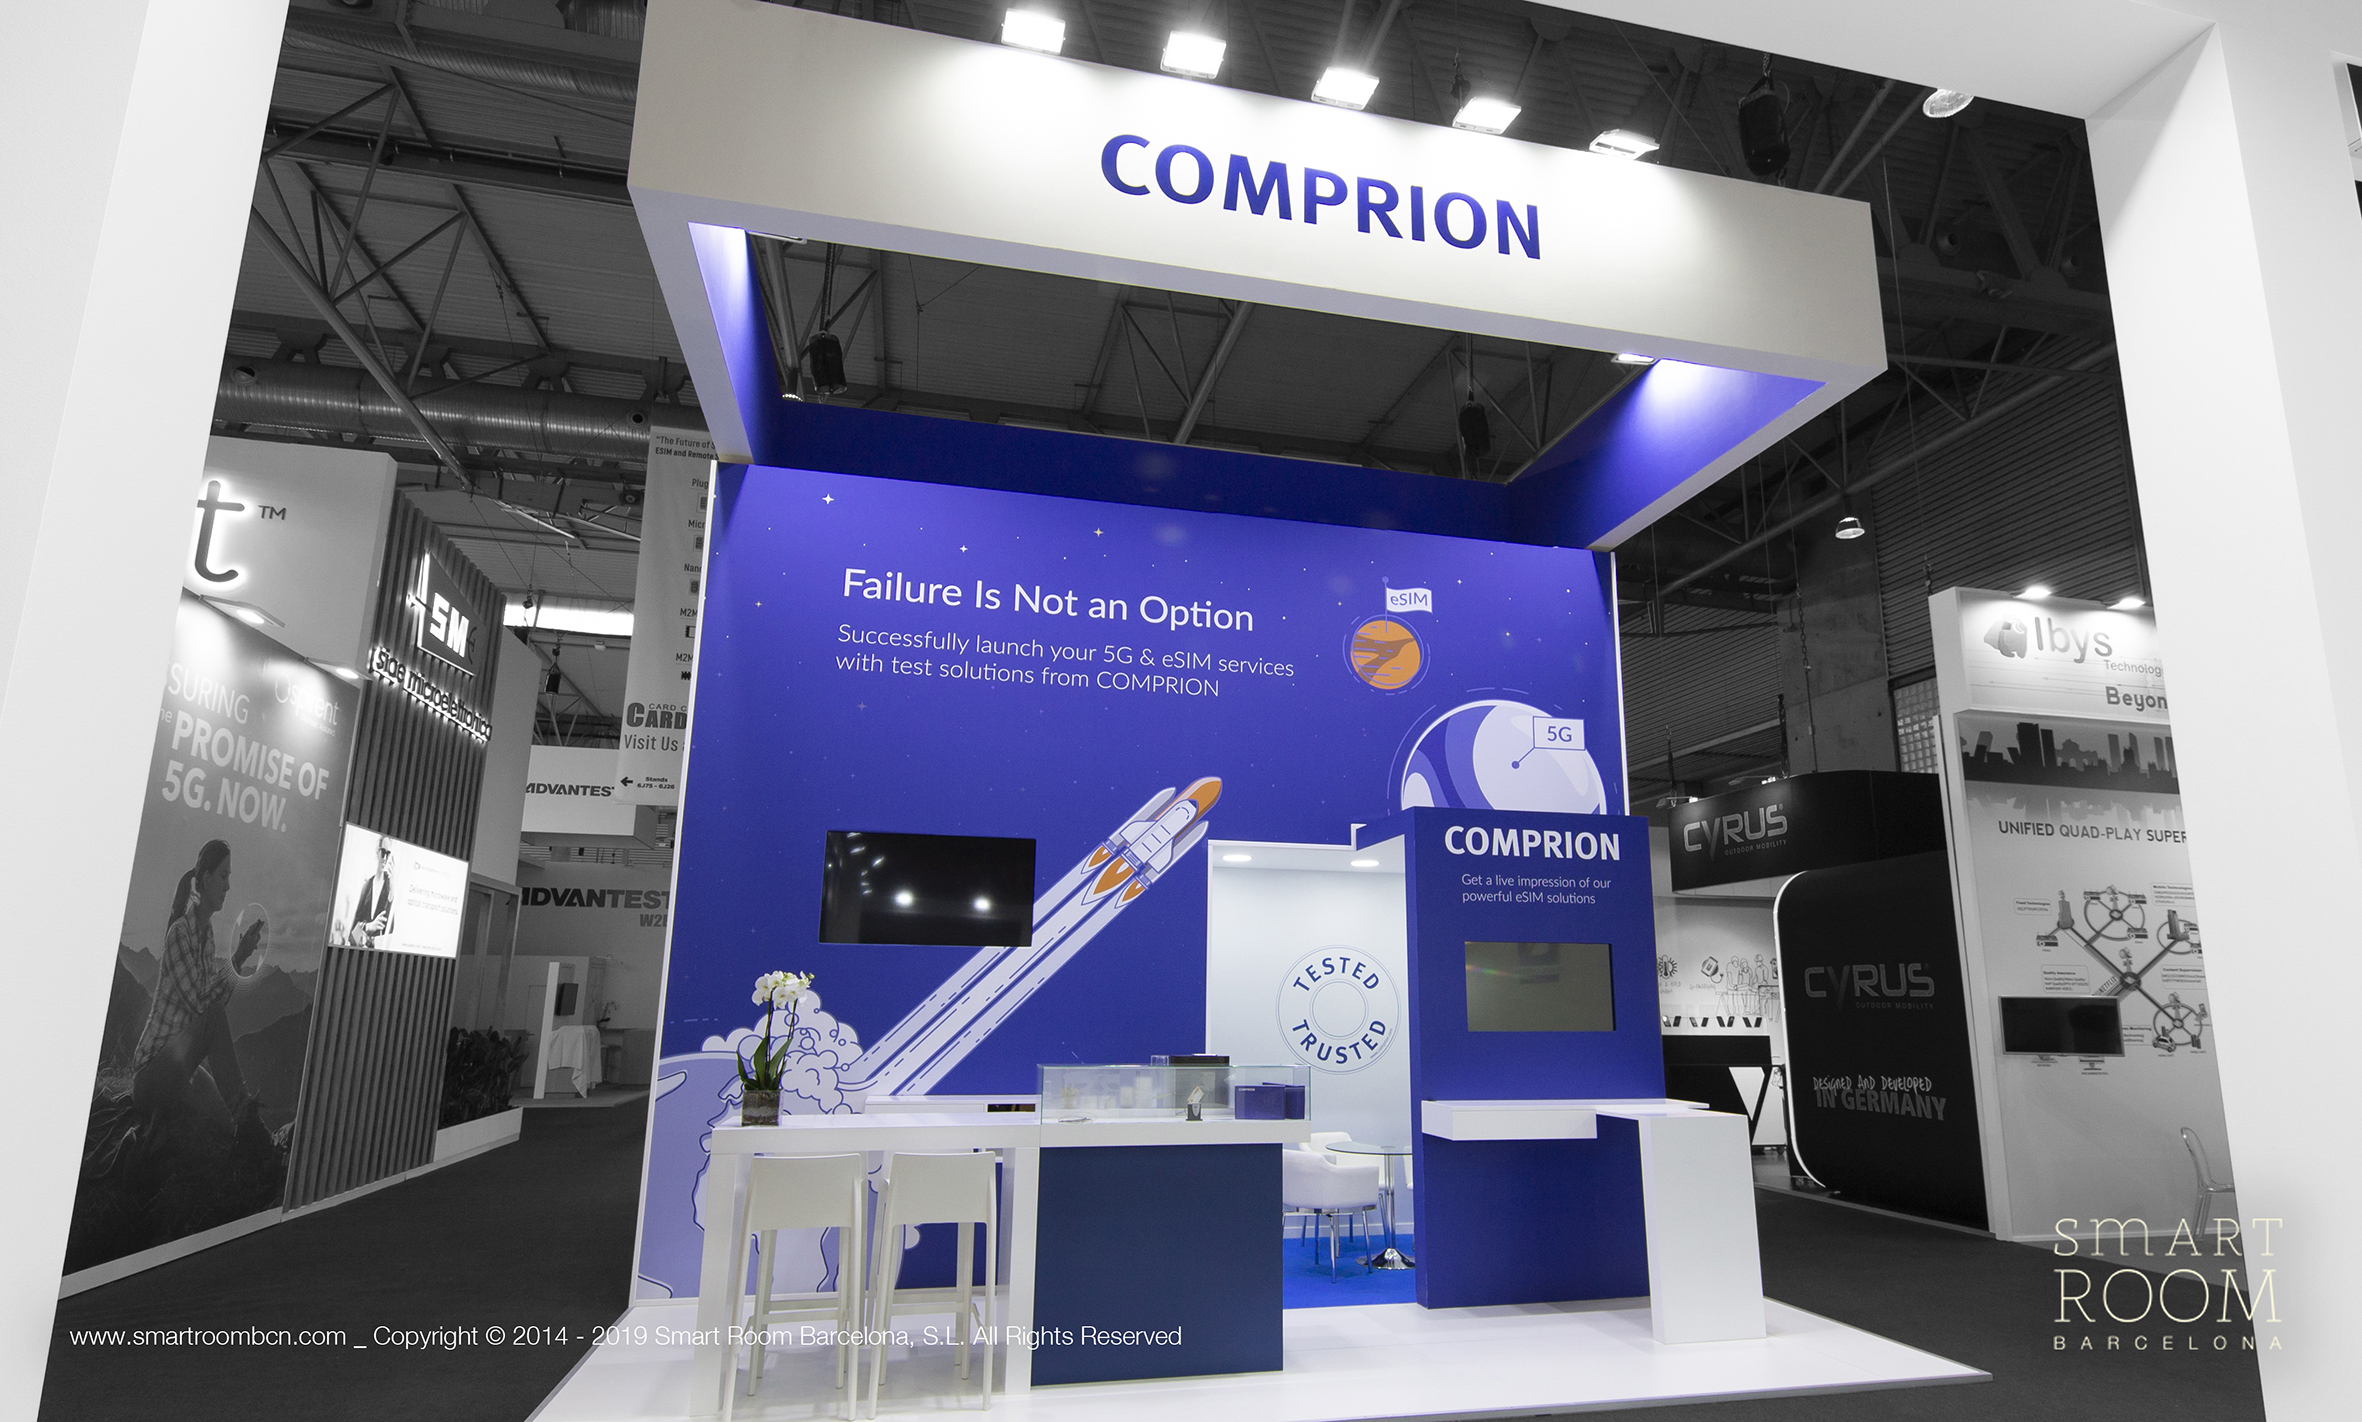 Stand for Comprion at MWC by Smart Room Barcelona